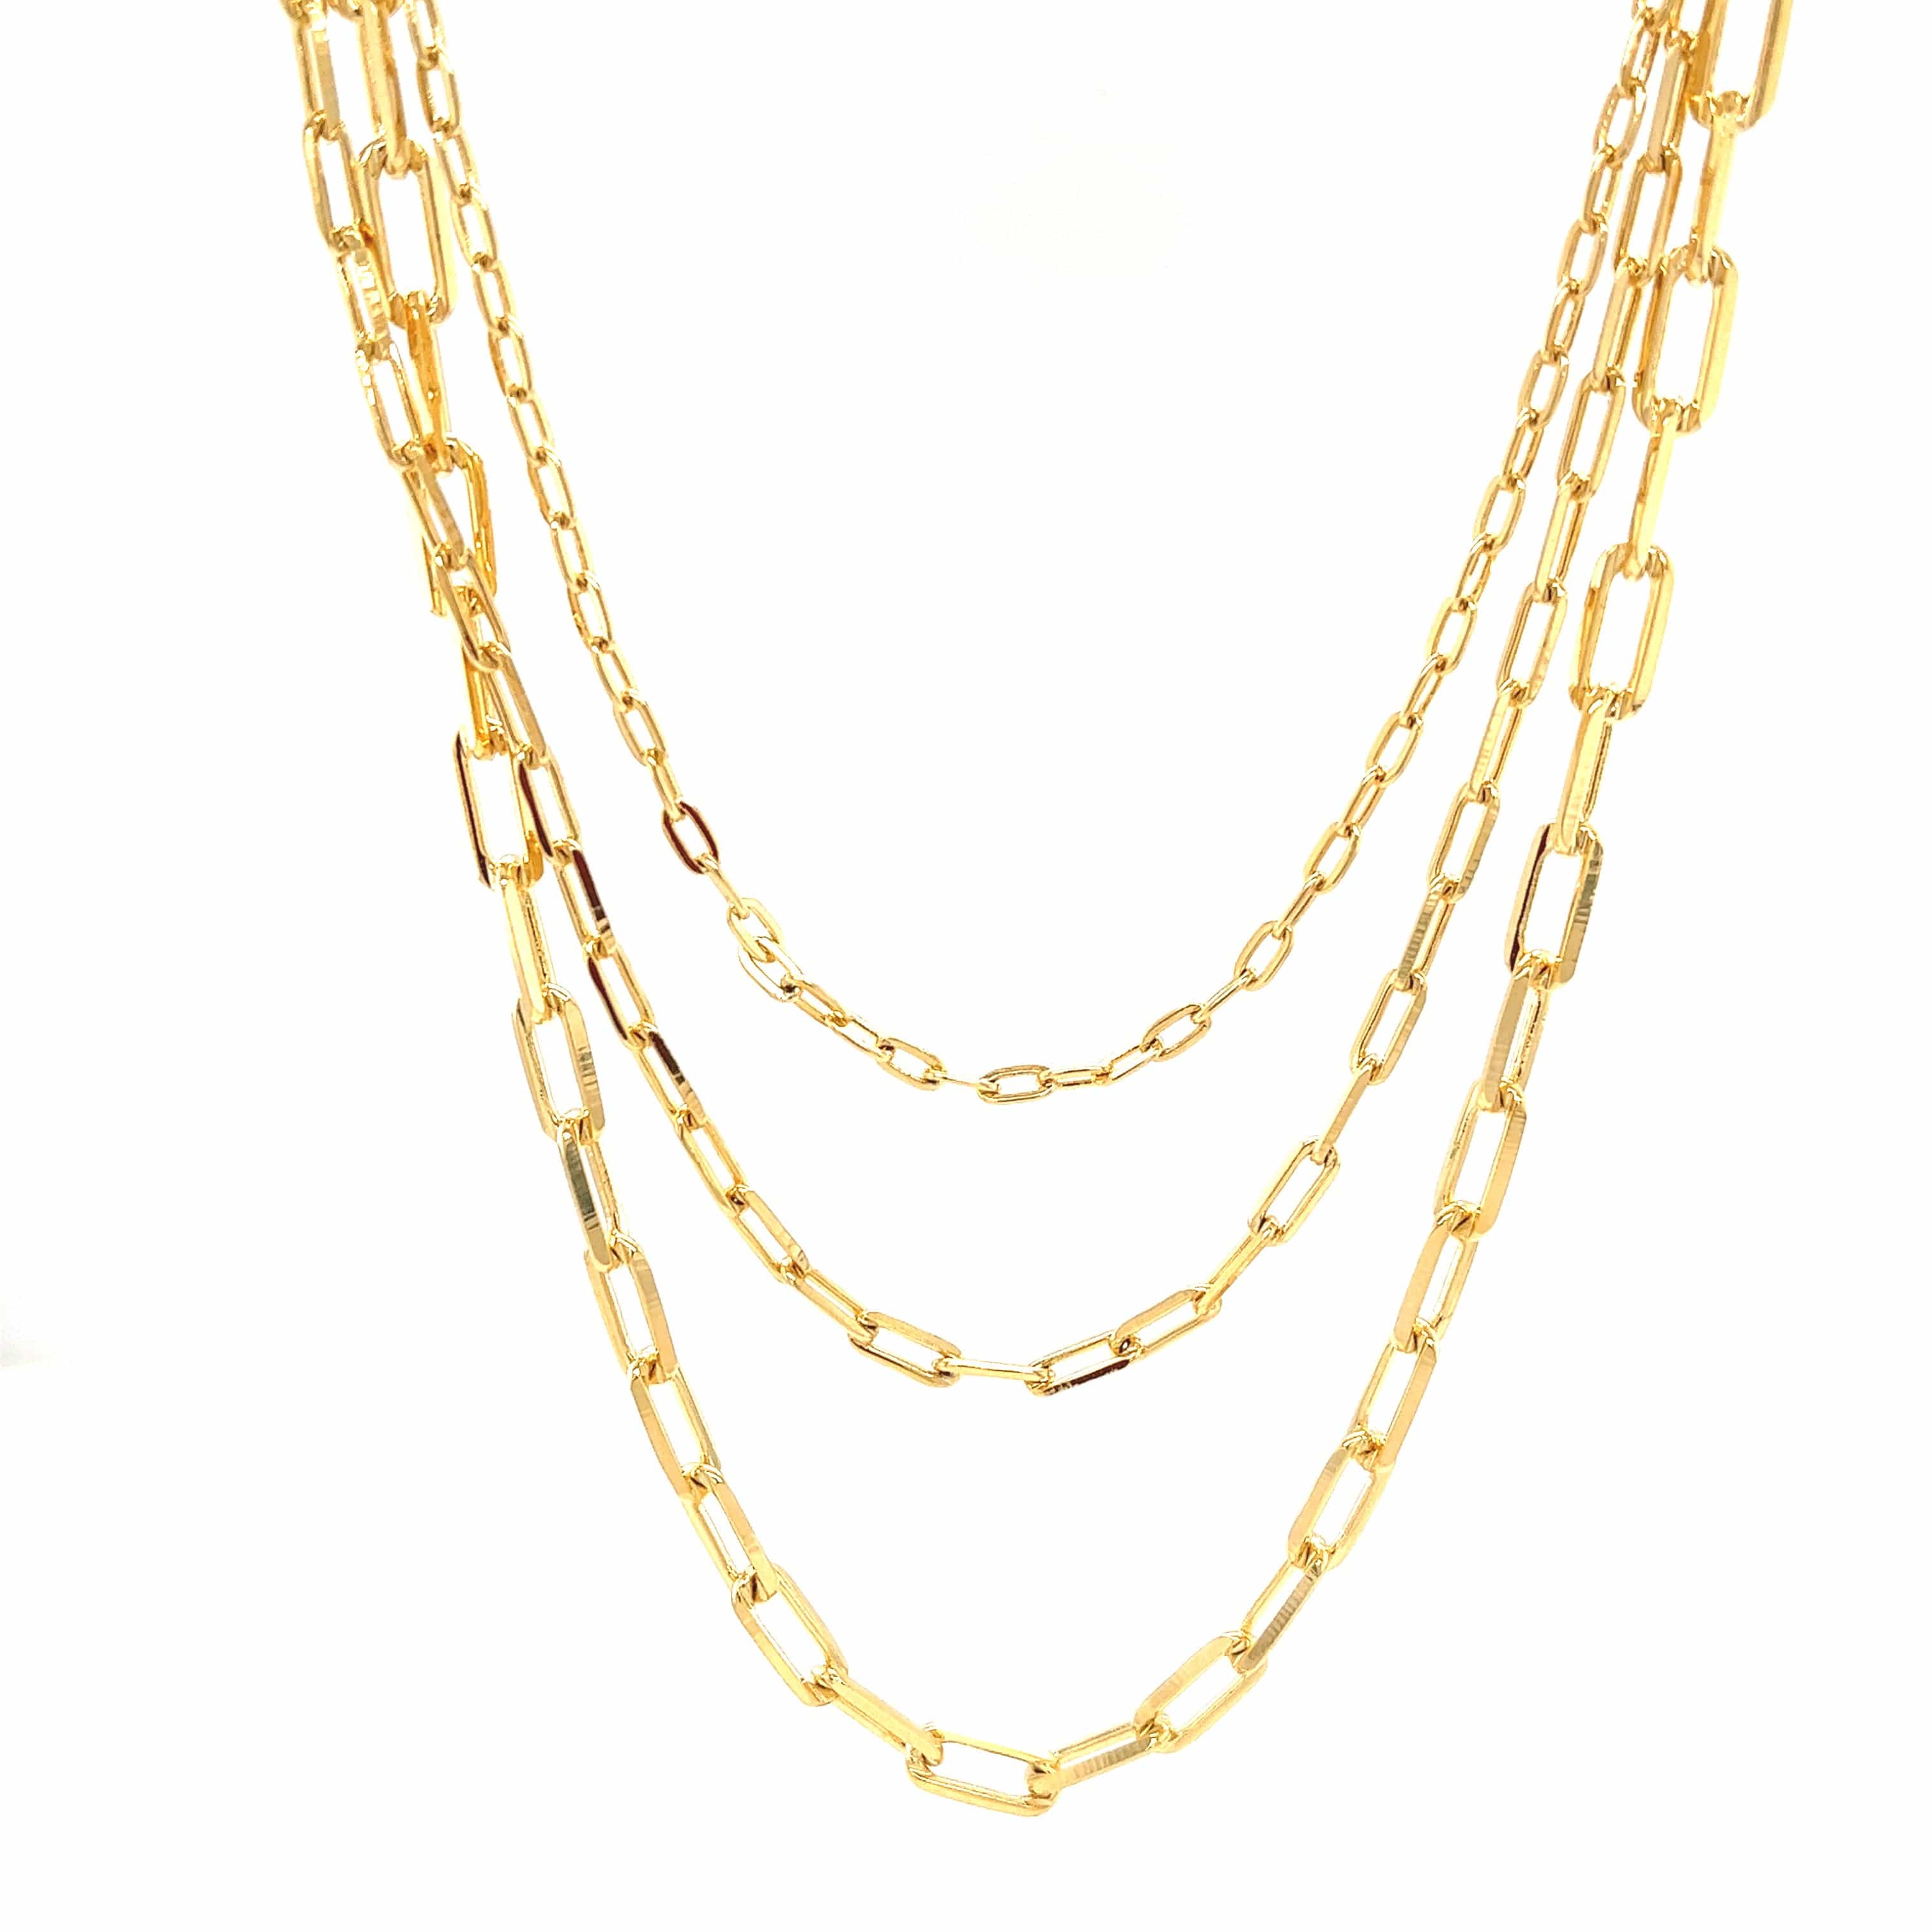 Triple Paper Clip Chain Necklace - Yellow Gold - Golden Tangerine